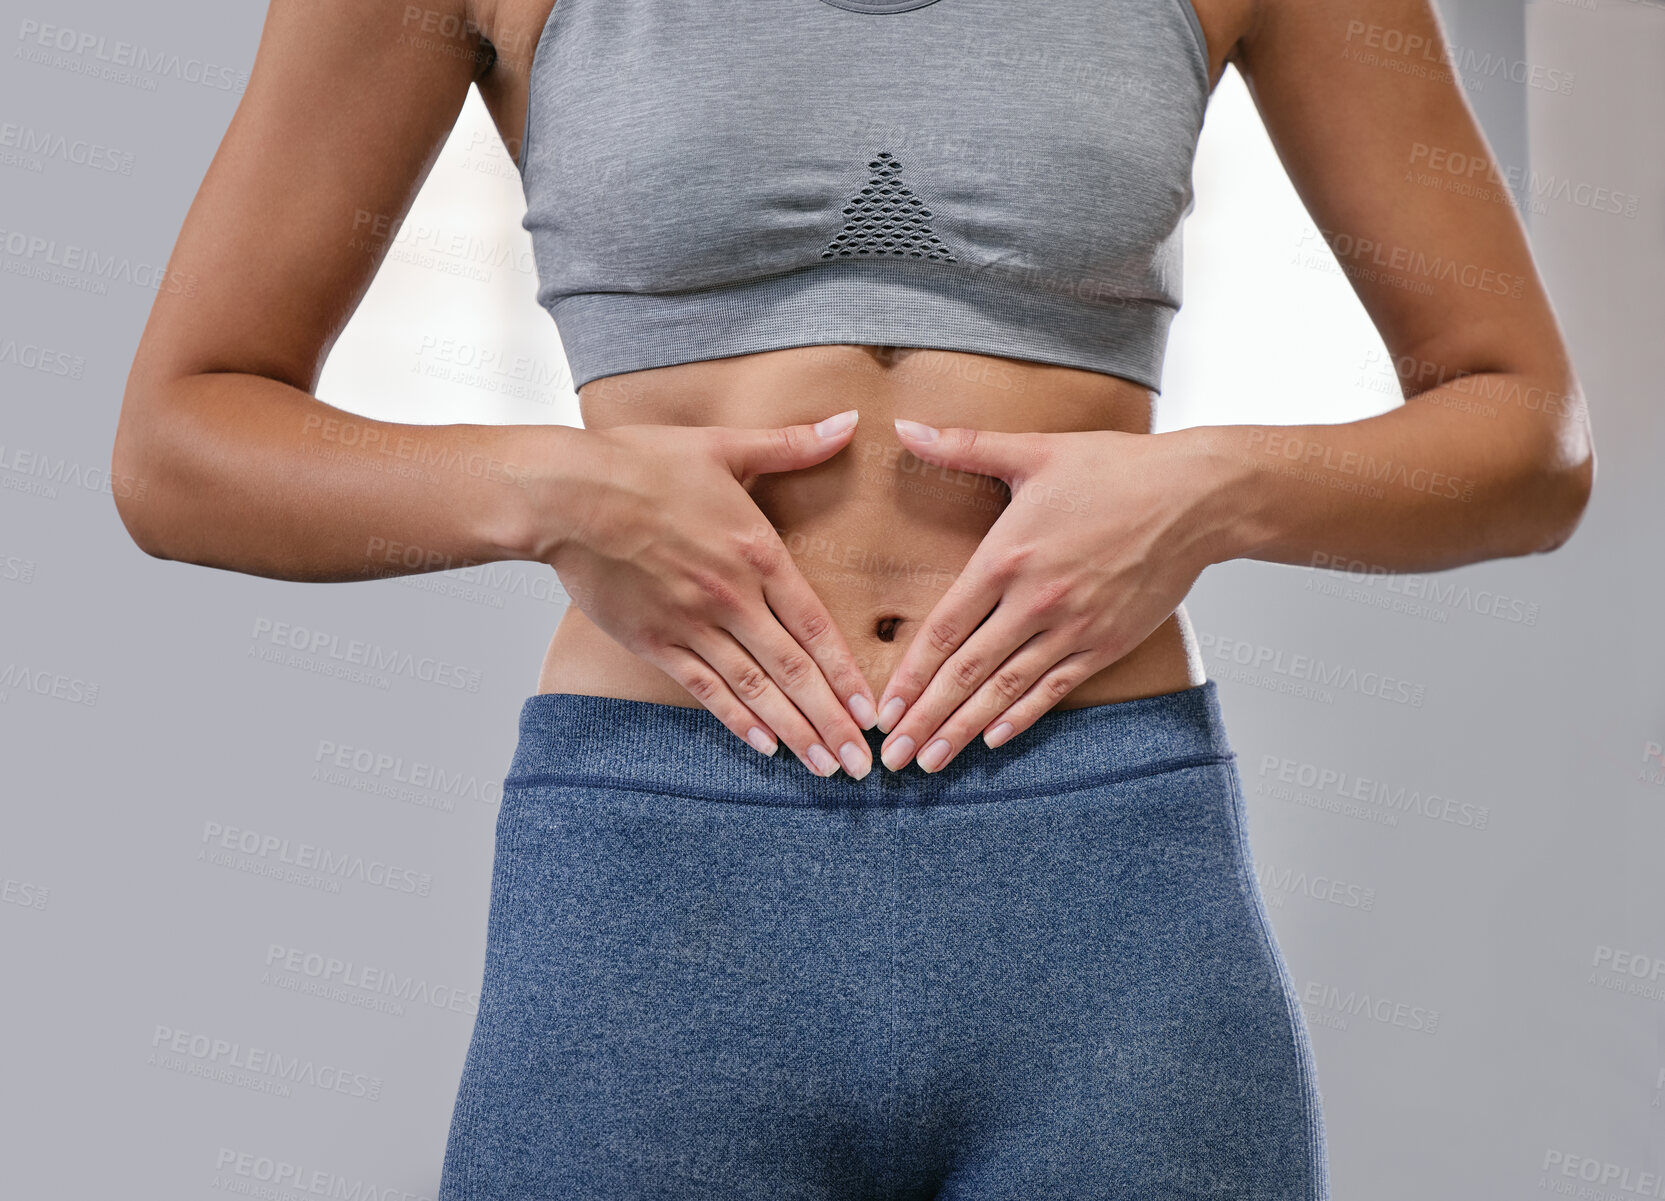 Buy stock photo Closeup of one fit caucasian woman framing hands around her slim belly to show weight loss while exercising against a grey background. Female athlete with toned body caring for gut digestion and wellbeing through active lifestyle and healthy diet